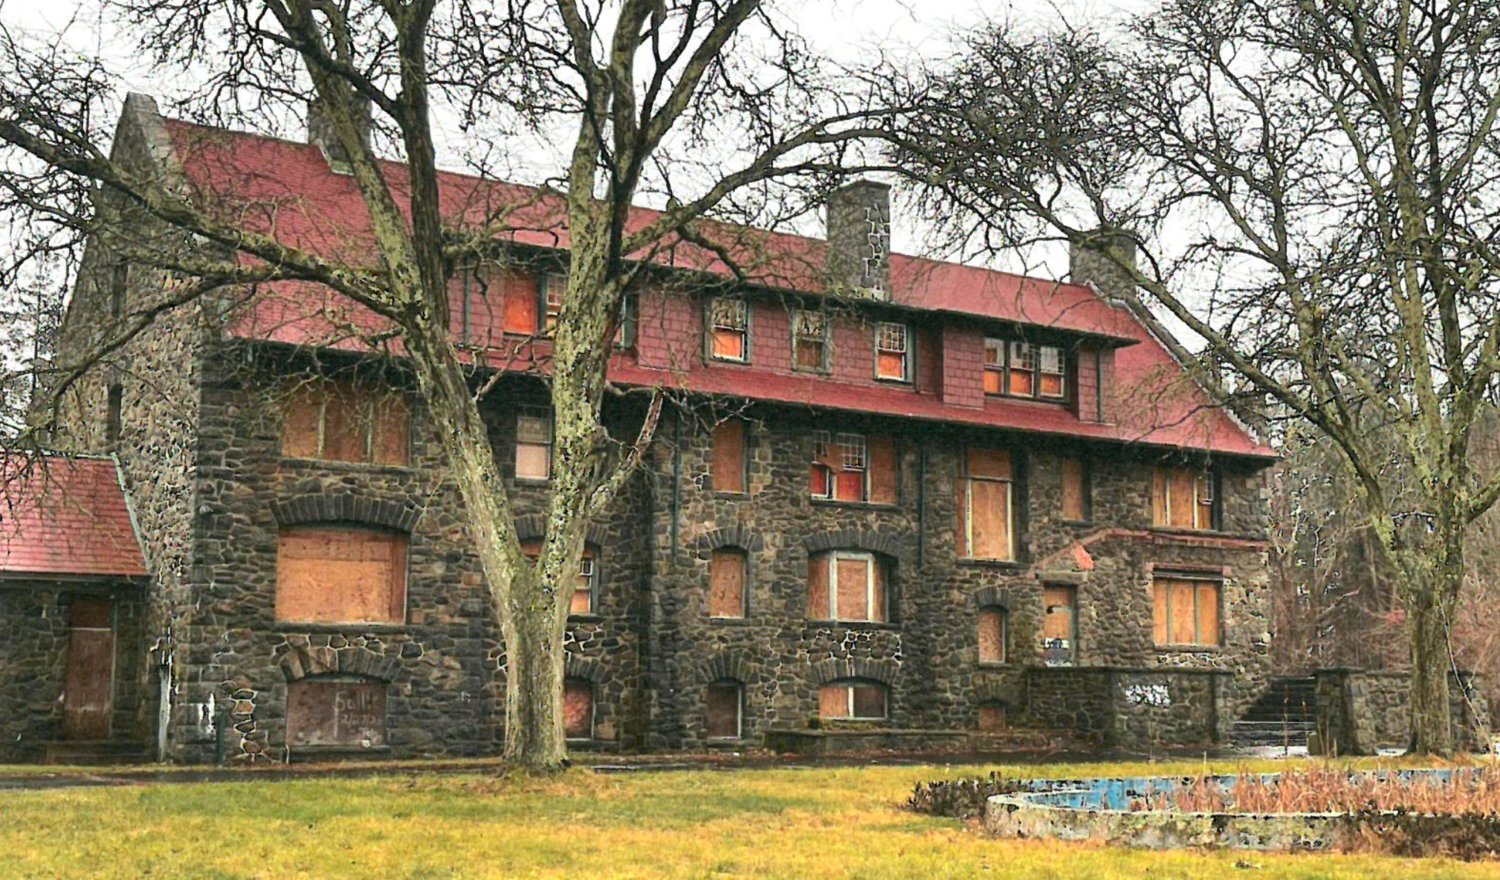 The architect for the project indicated that Belton Court would be converted into a hotel but the attorney for ShineHarmony said that was not part of the plan.